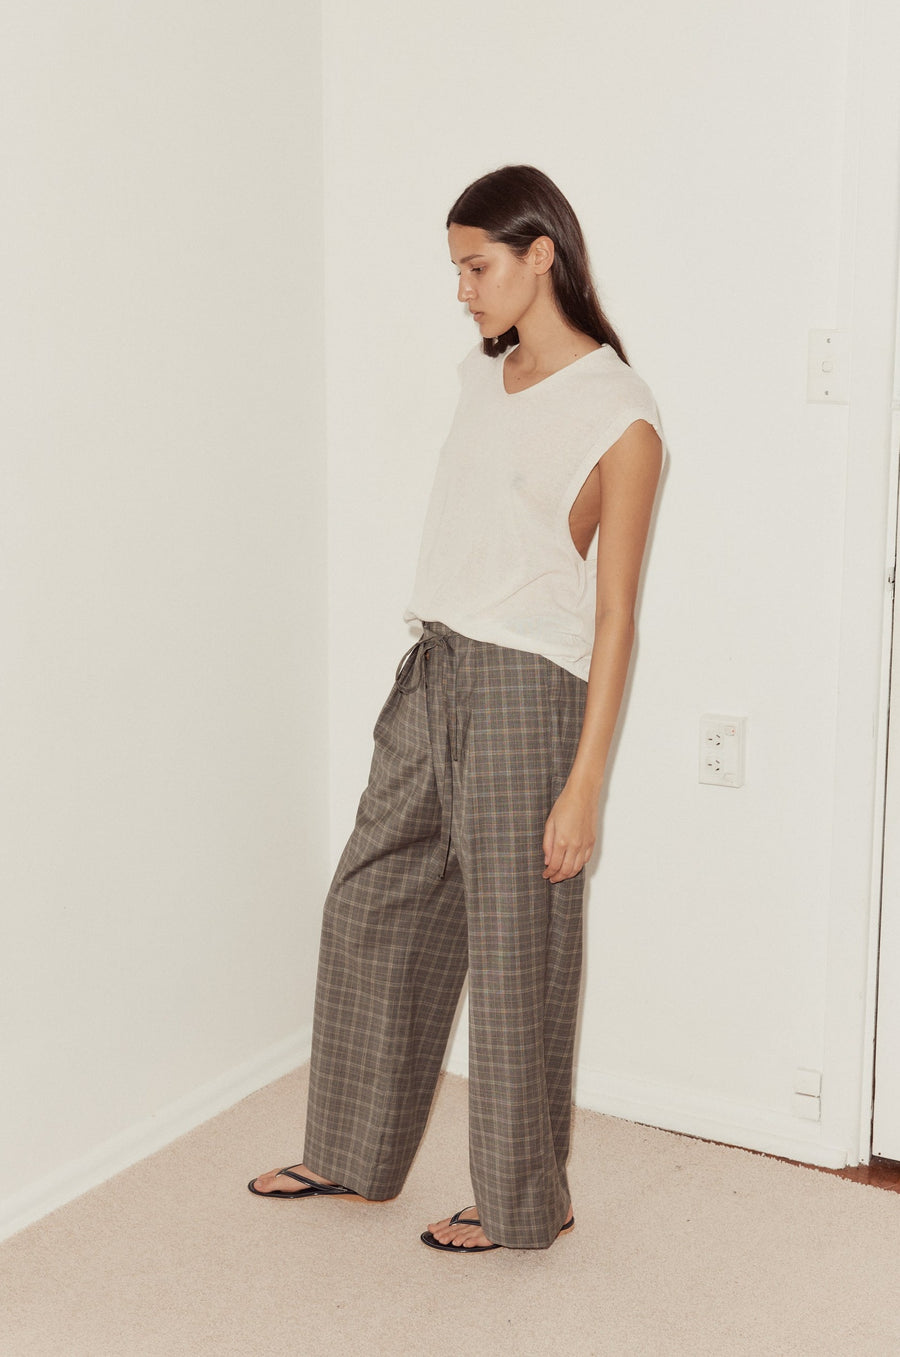 Mid shot of female model wearing the Tailored Pants in Everyday Check styled with the Loose Knitted Vest in white. Pant features relaxed wide leg with self fabric tie at waist opening.